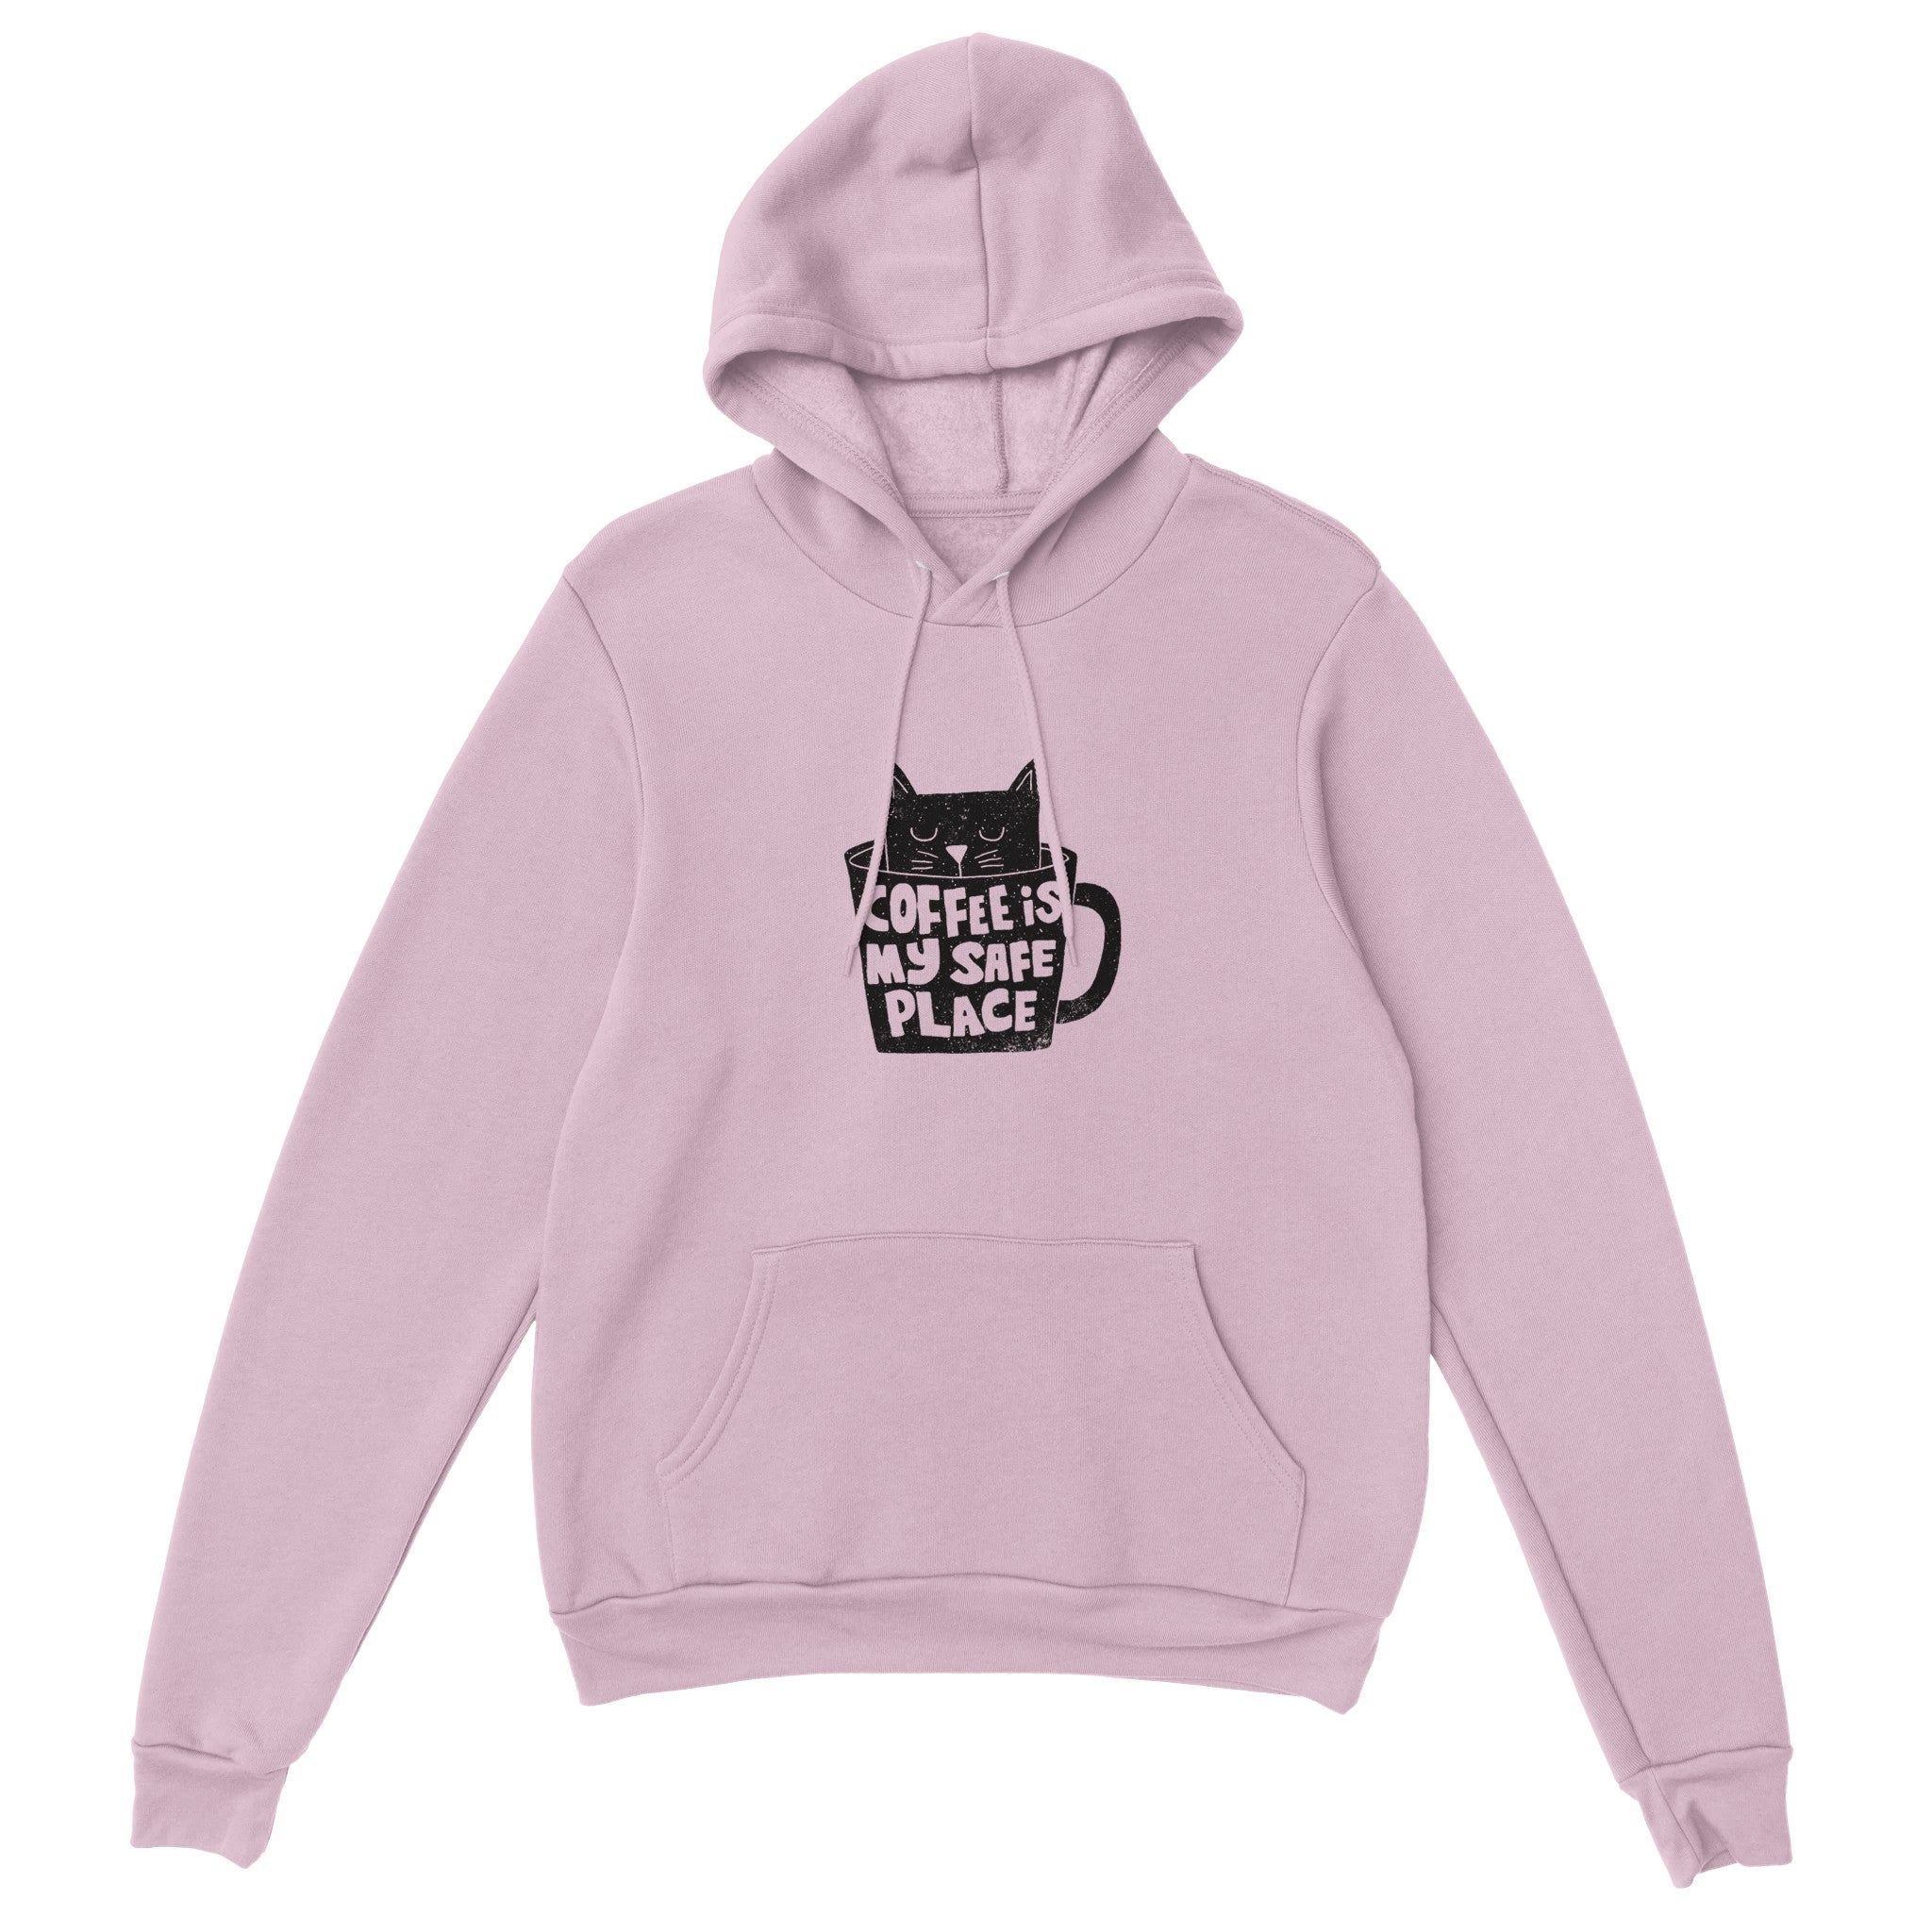 COFFEE IS MY SAFE PLACE Pullover Hoodie - Optimalprint